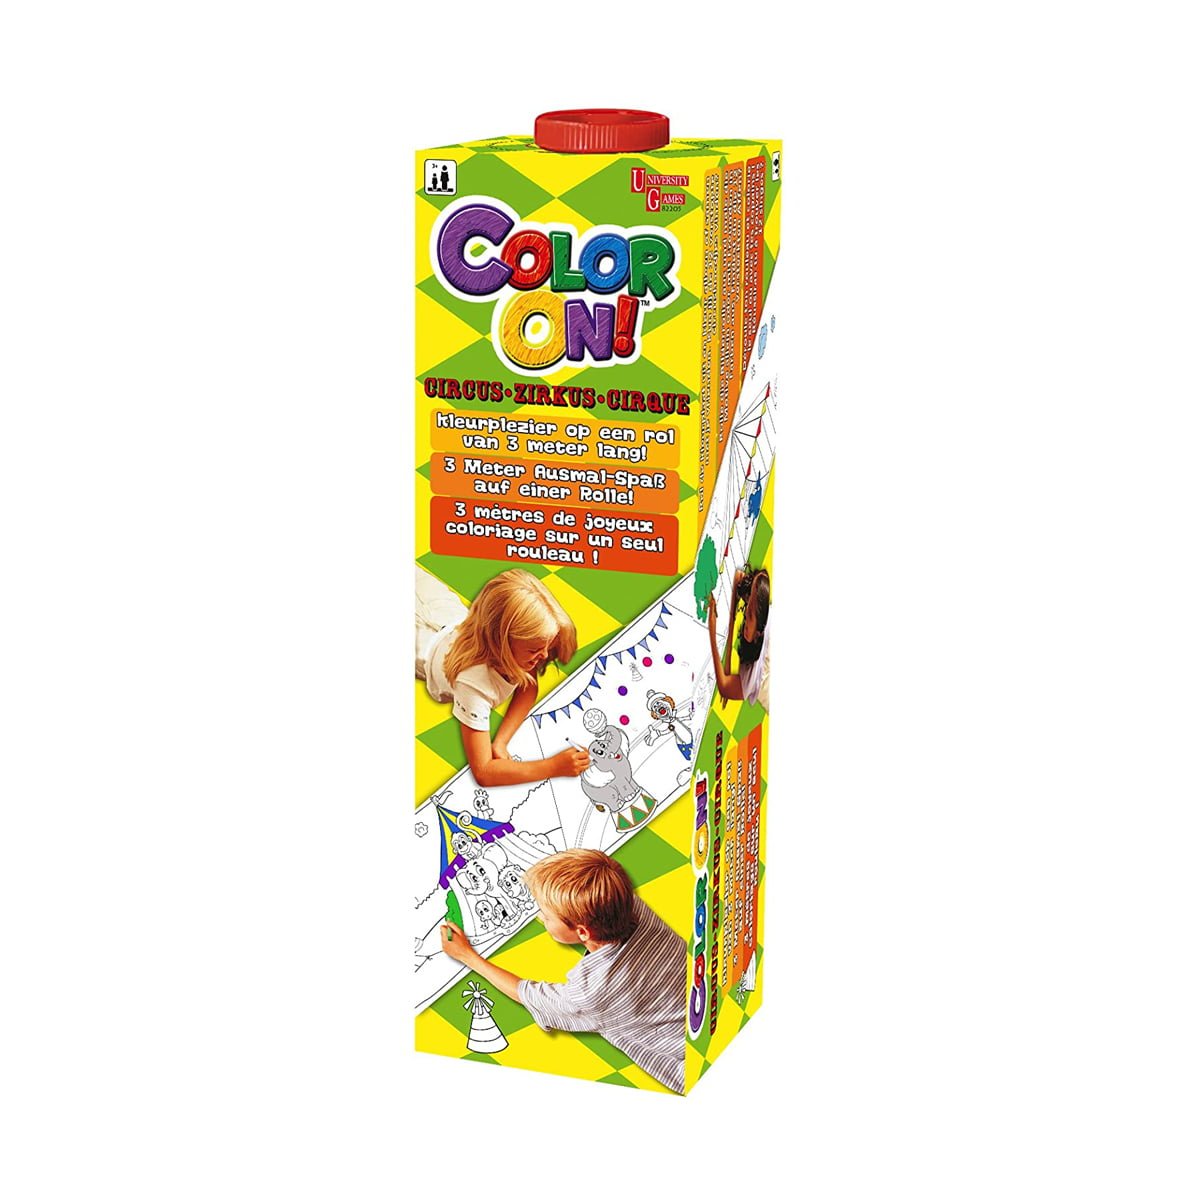 Colouring paper roll - Circus